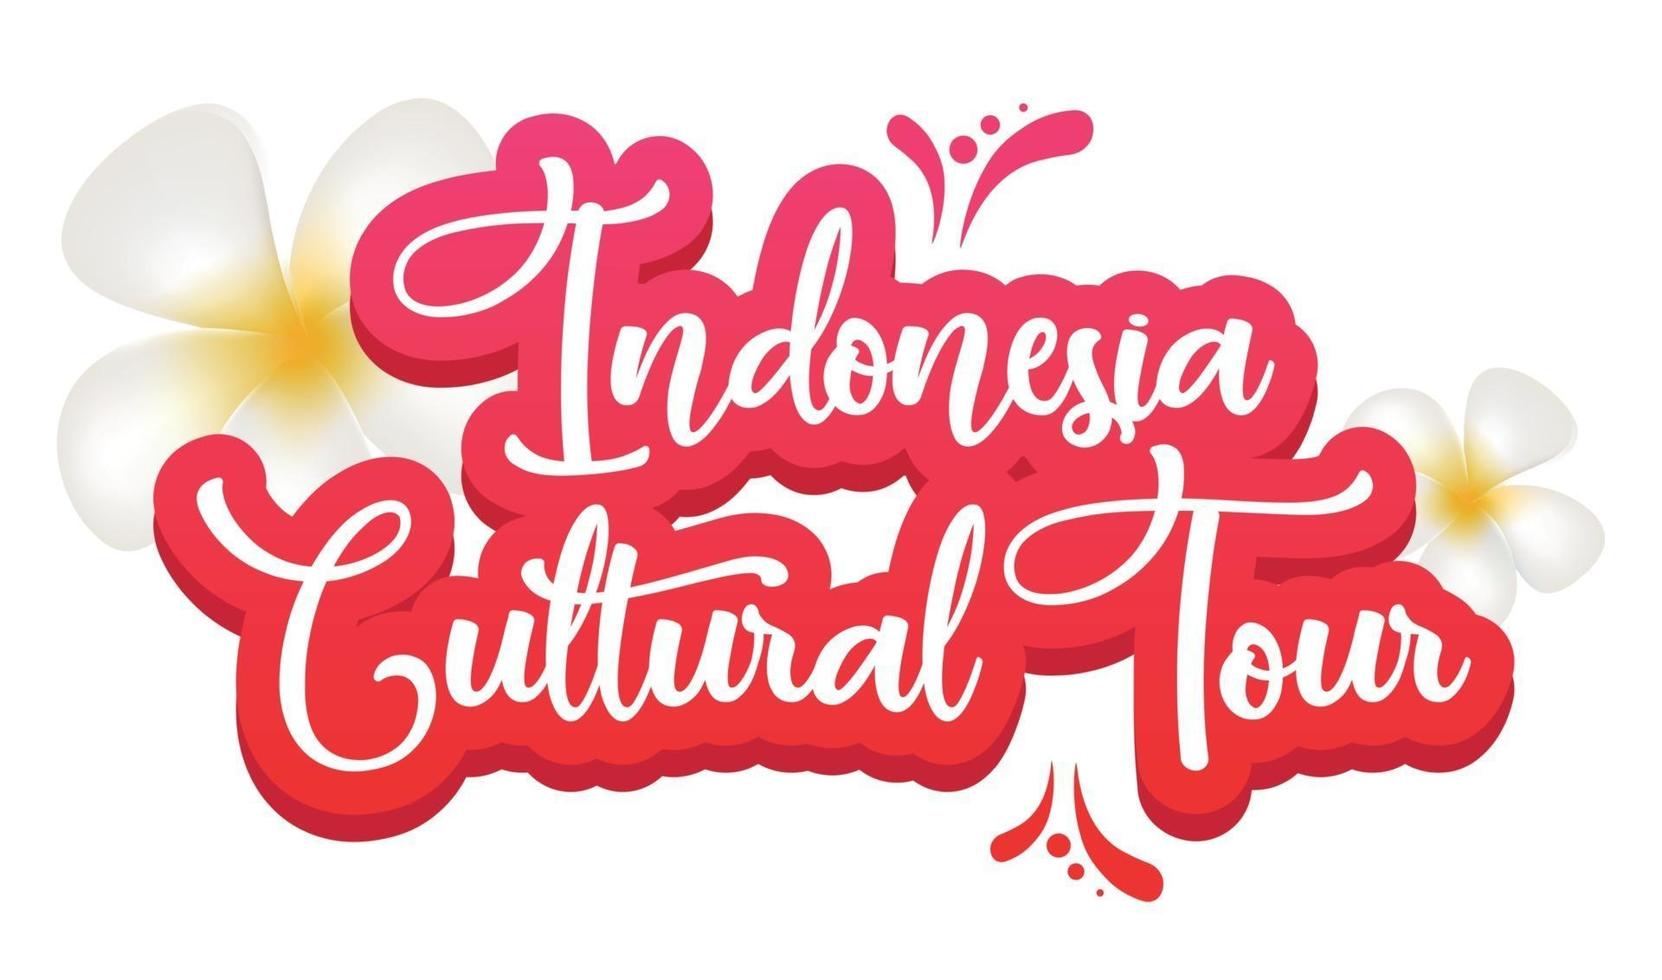 Indonesia cultural tour flat poster vector template